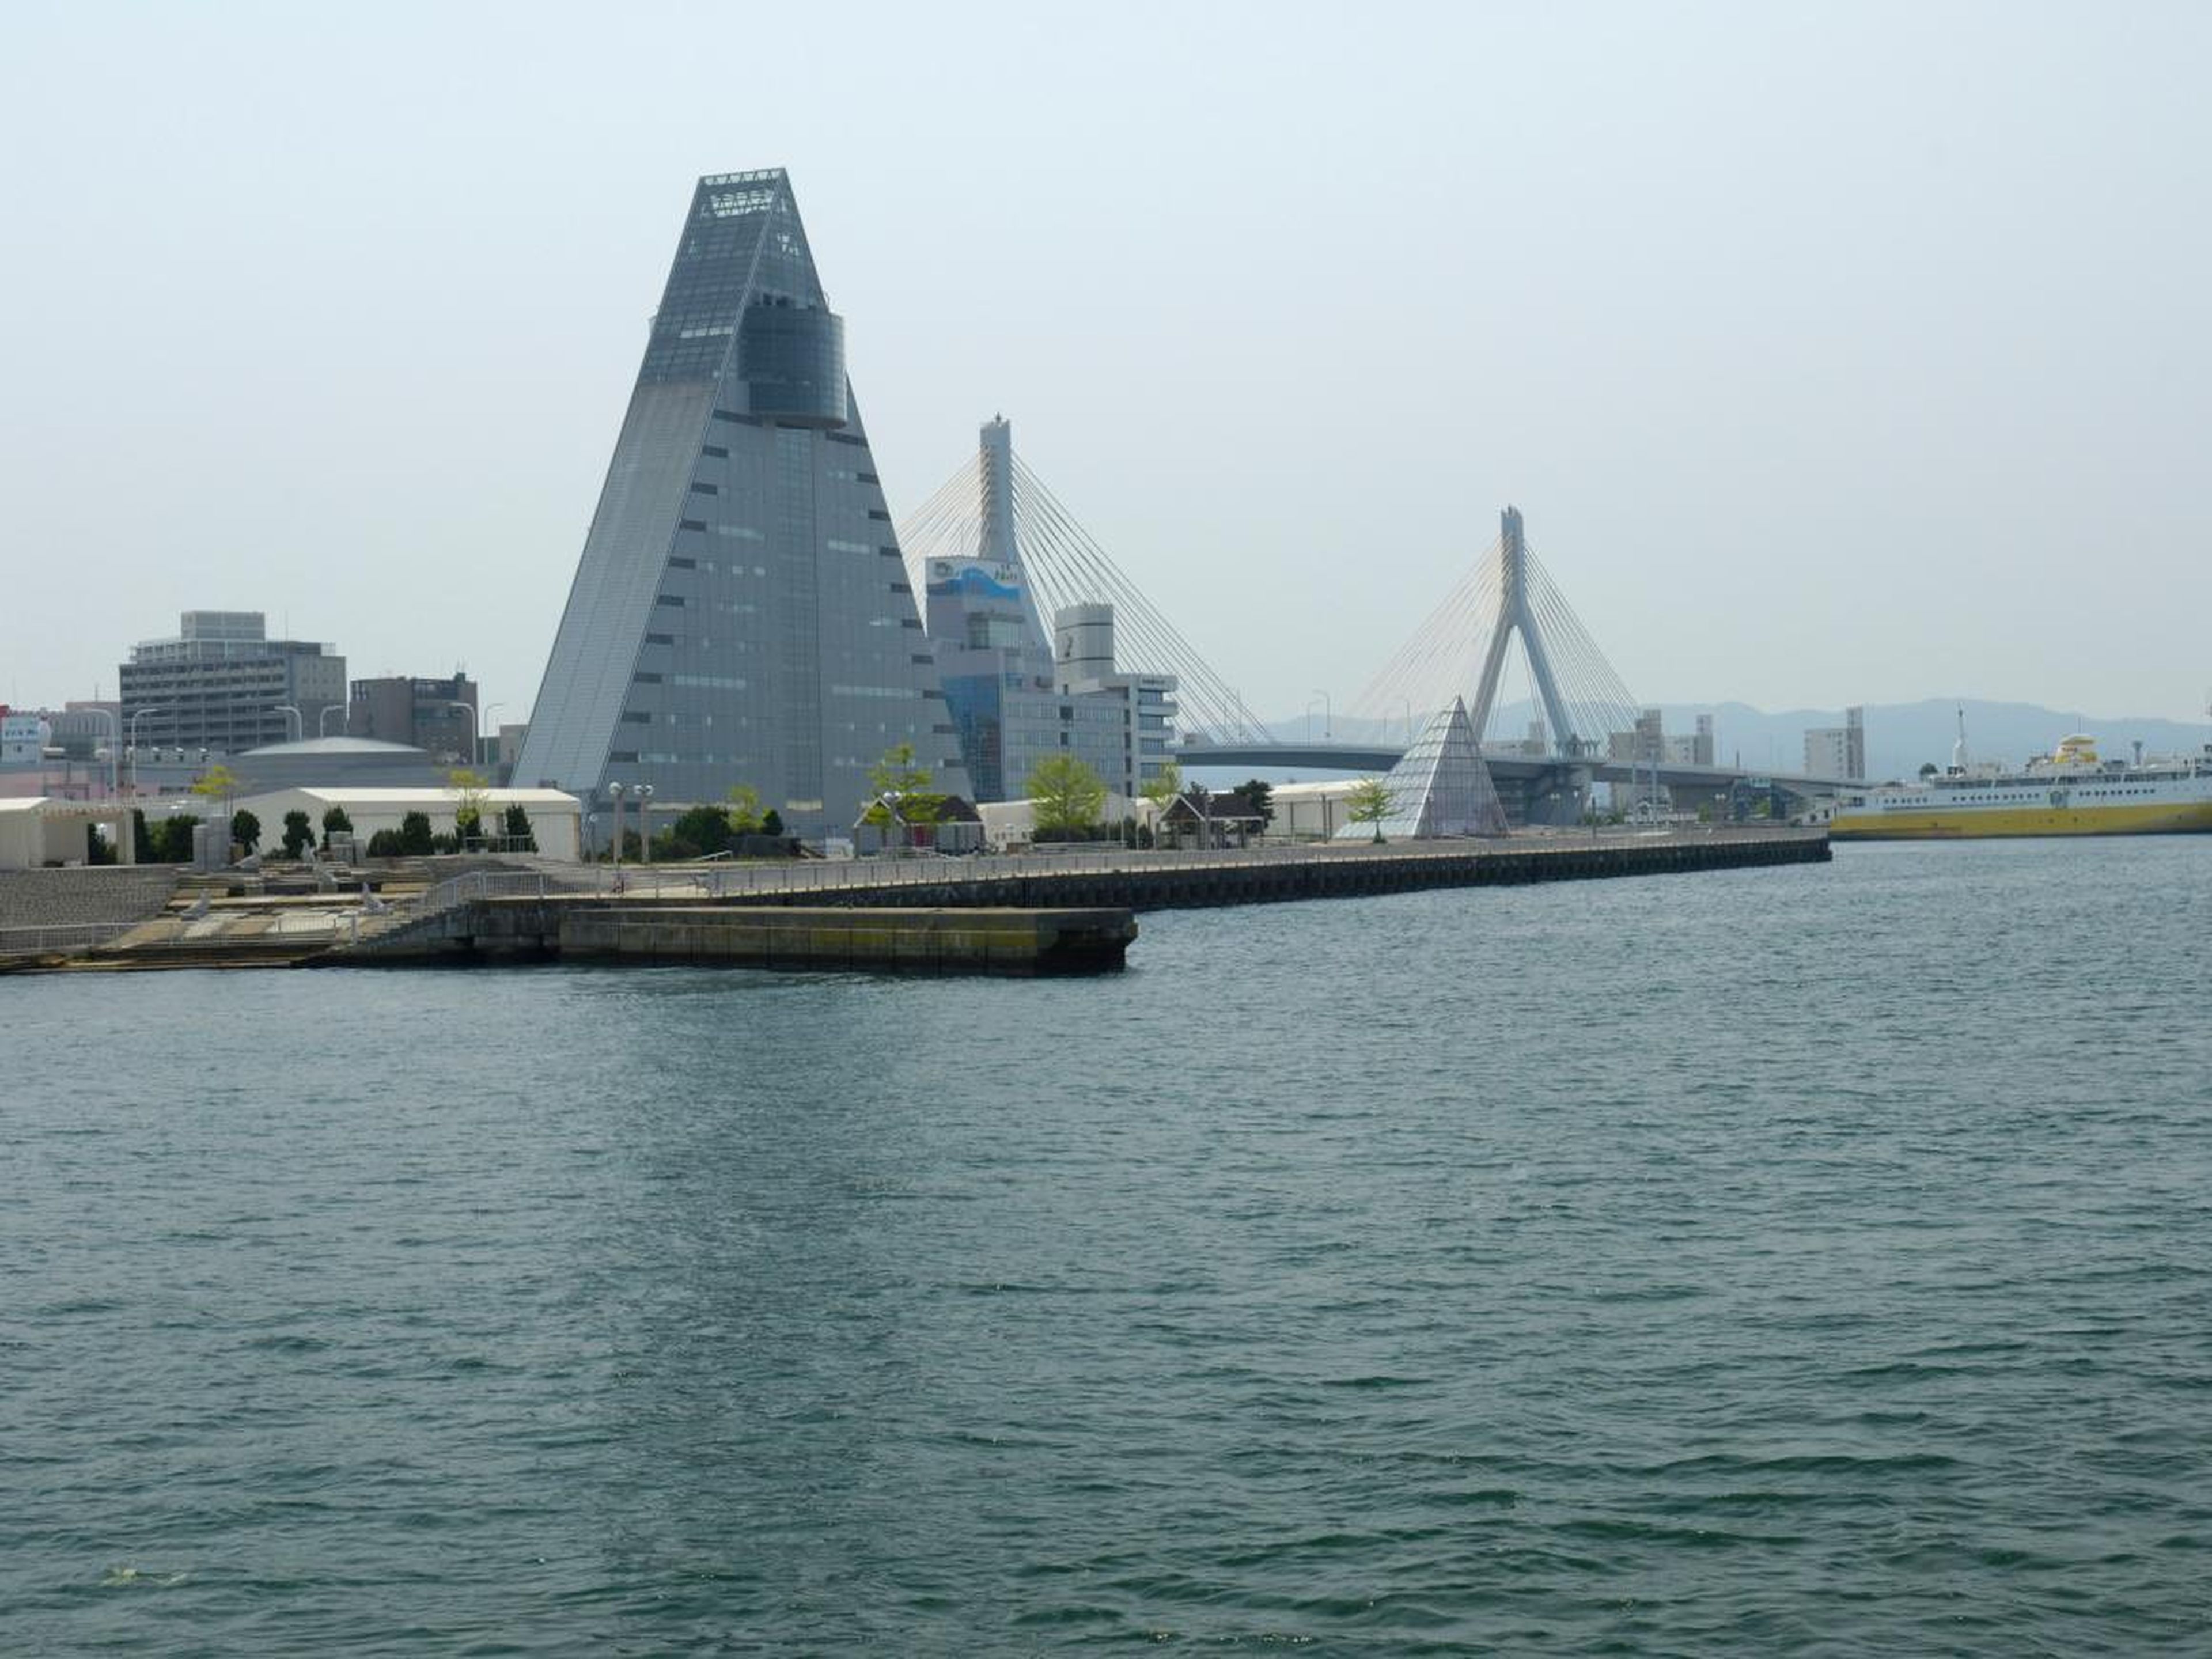 Construction on a seaport-turned-city began during early Edo period Japan, and was named Aomori City in 1624.